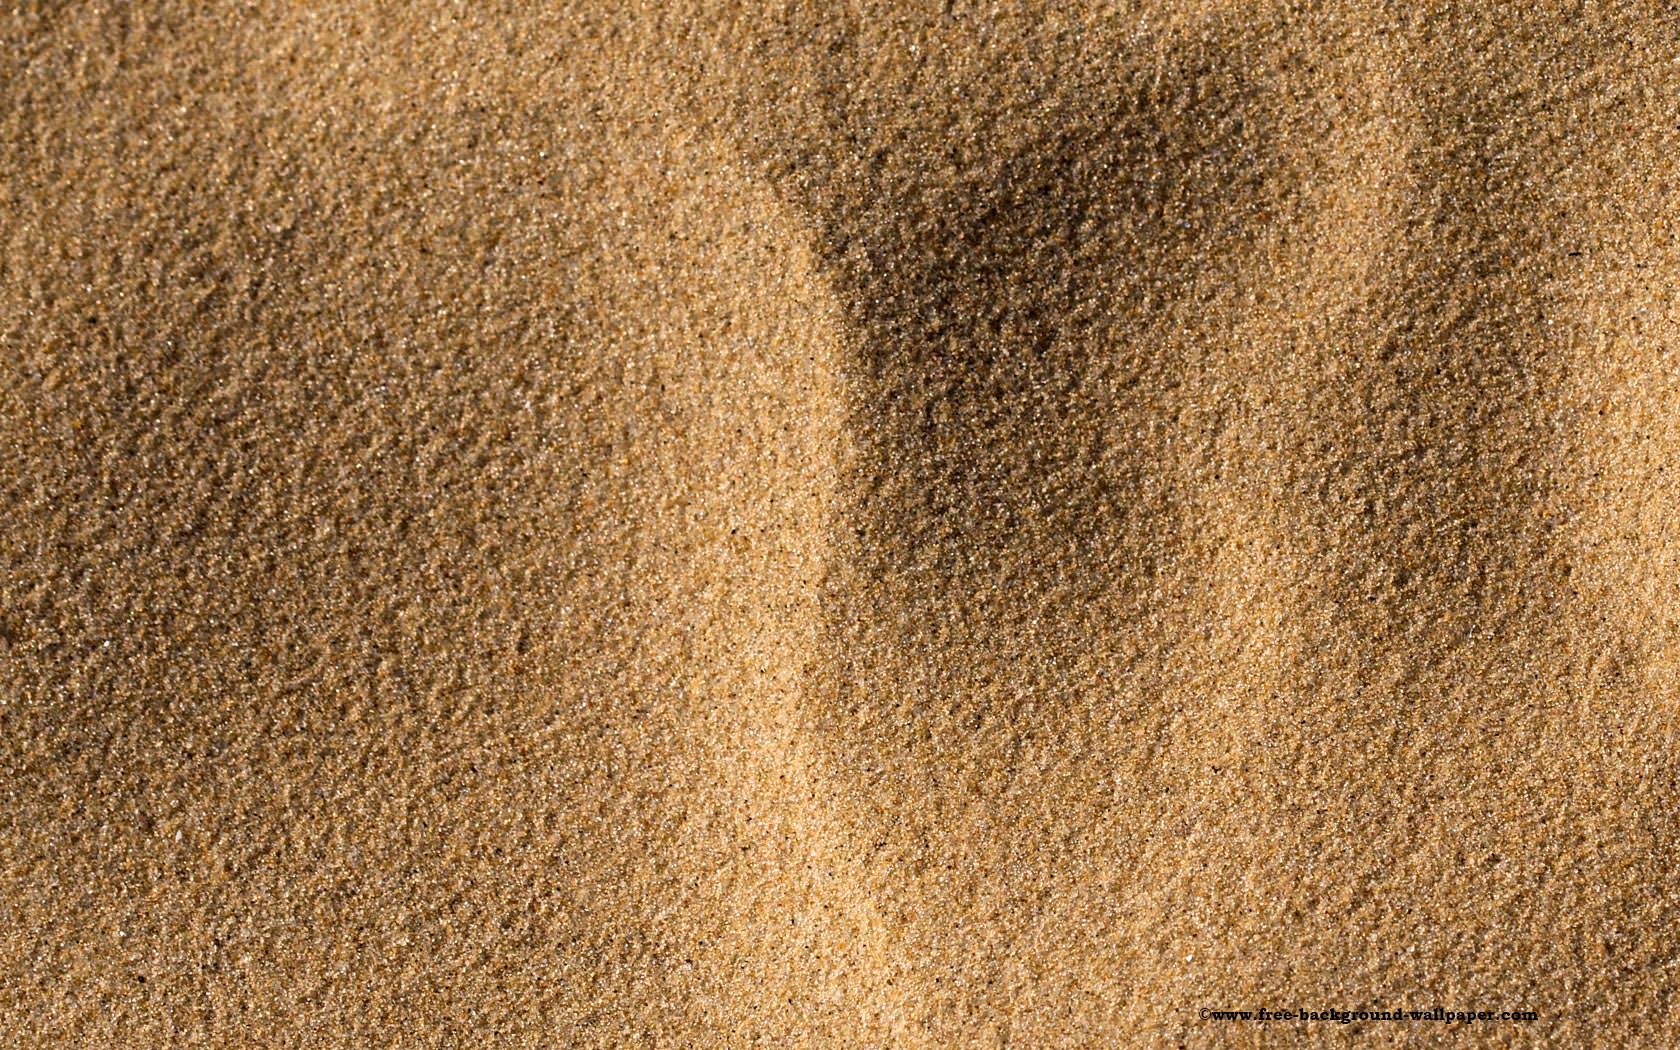 Soft Sand Texture Picture Beach Background